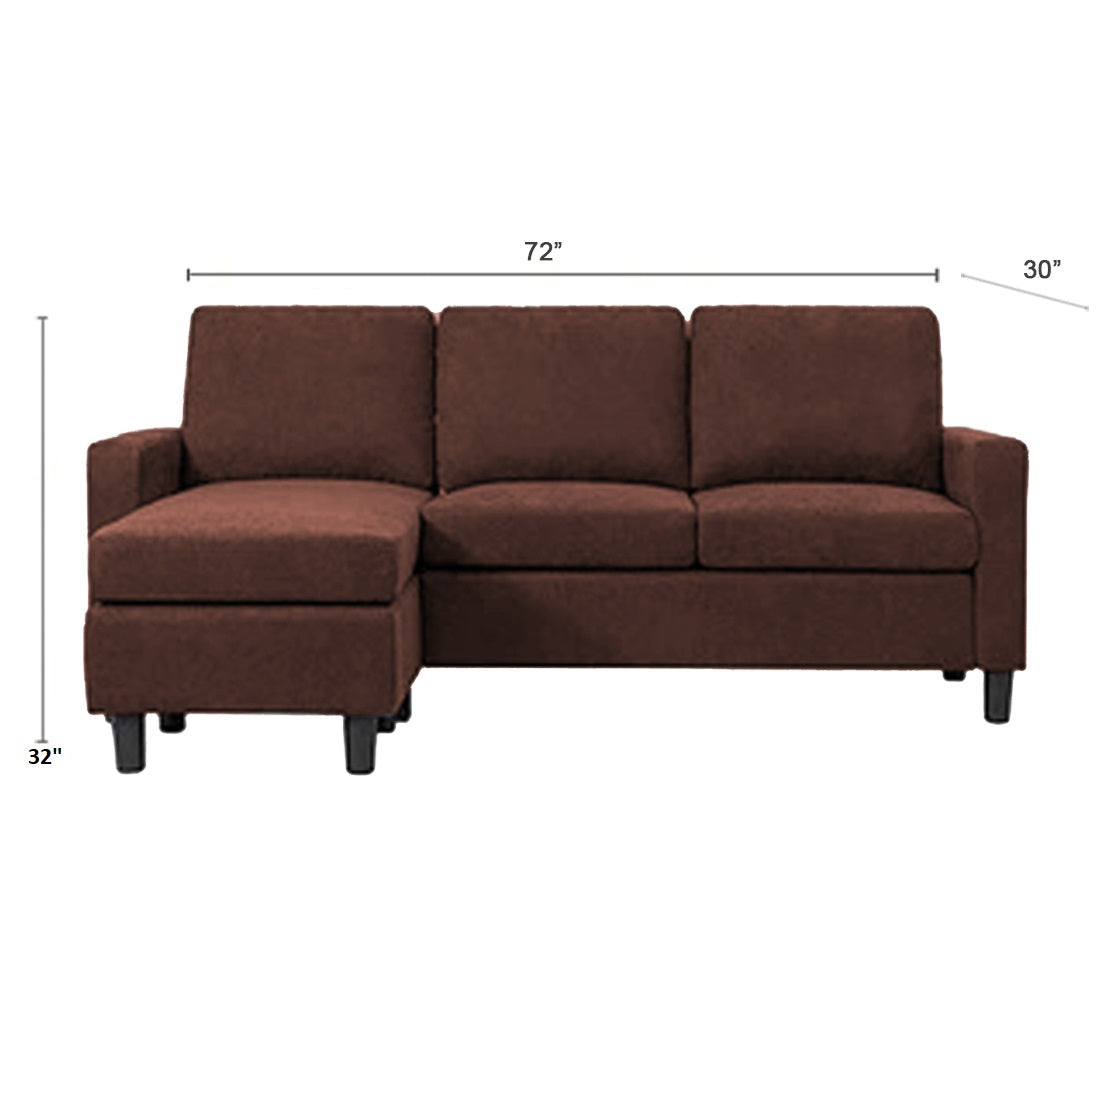 Swan 3 Seater Sofa With Ottoman For Living Room